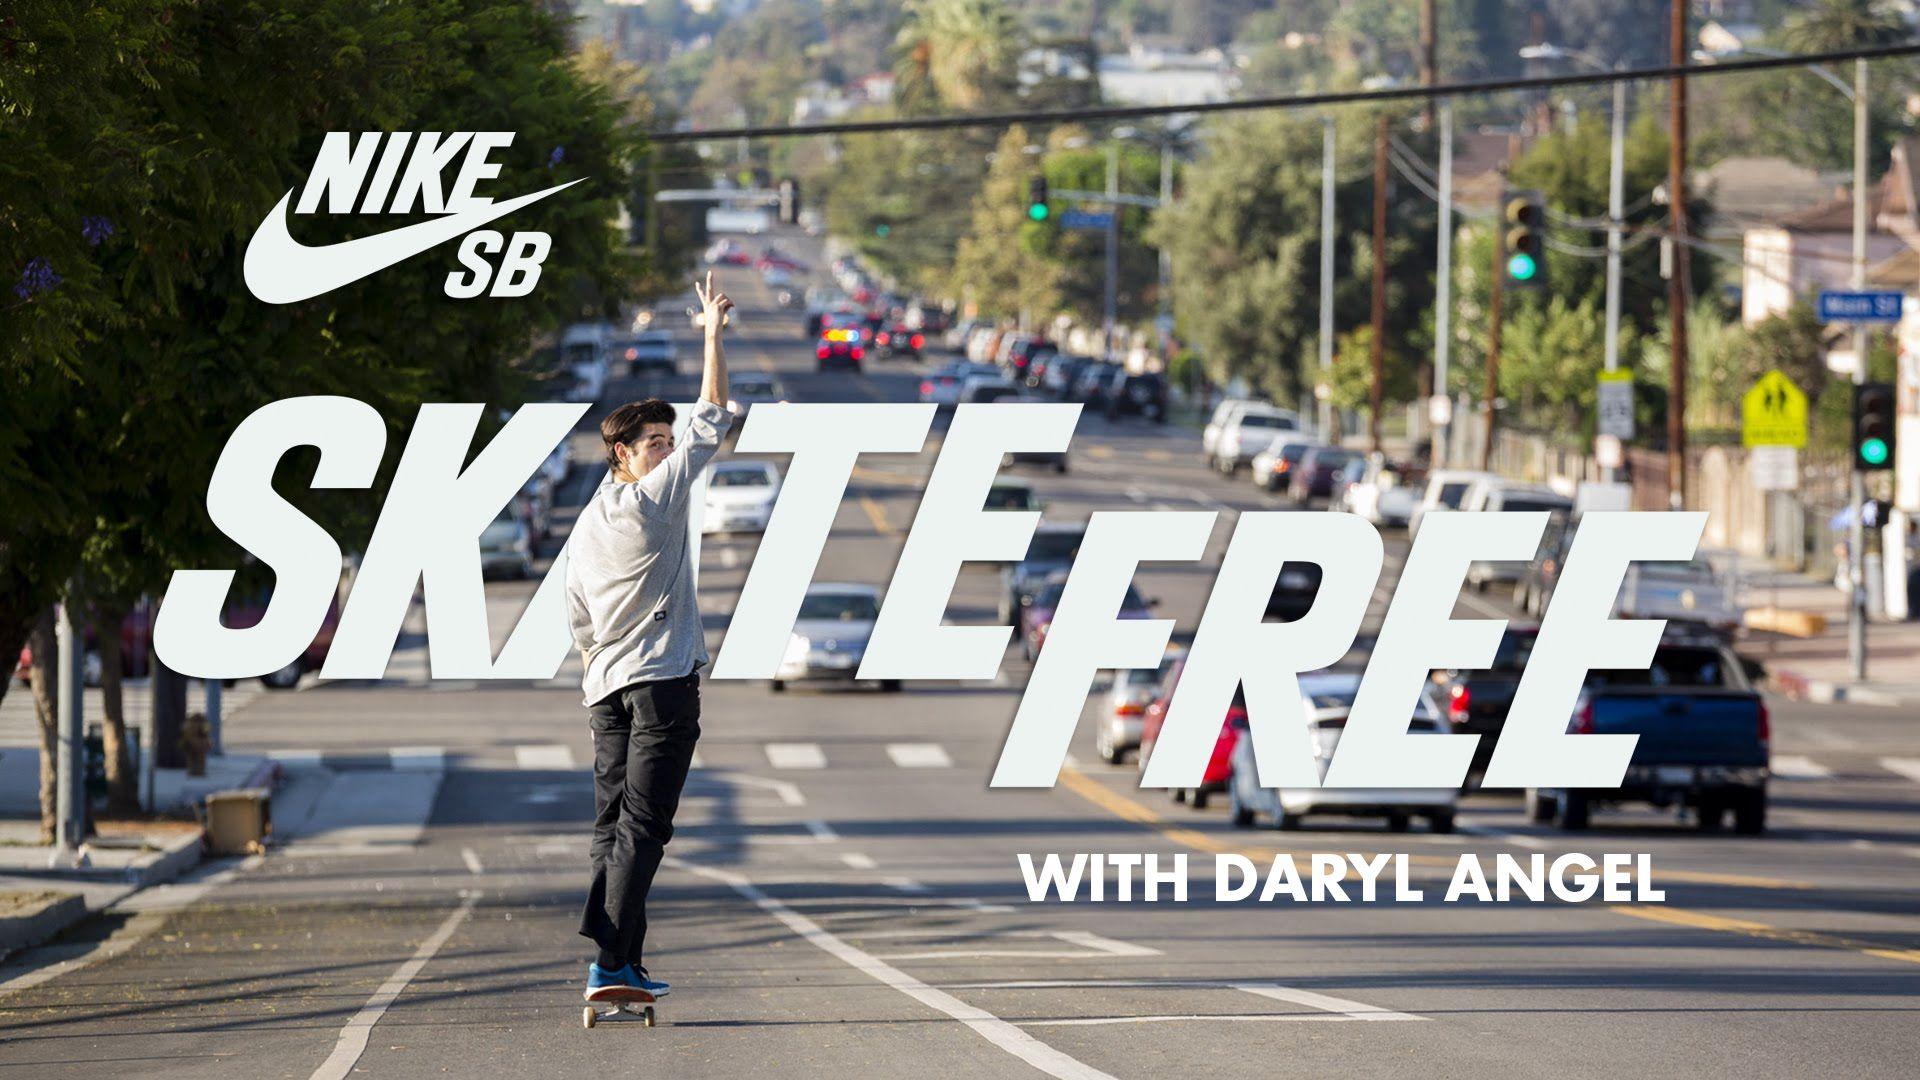 Skate Free. Daryl Angel's Daily Operations Around His Home in Los